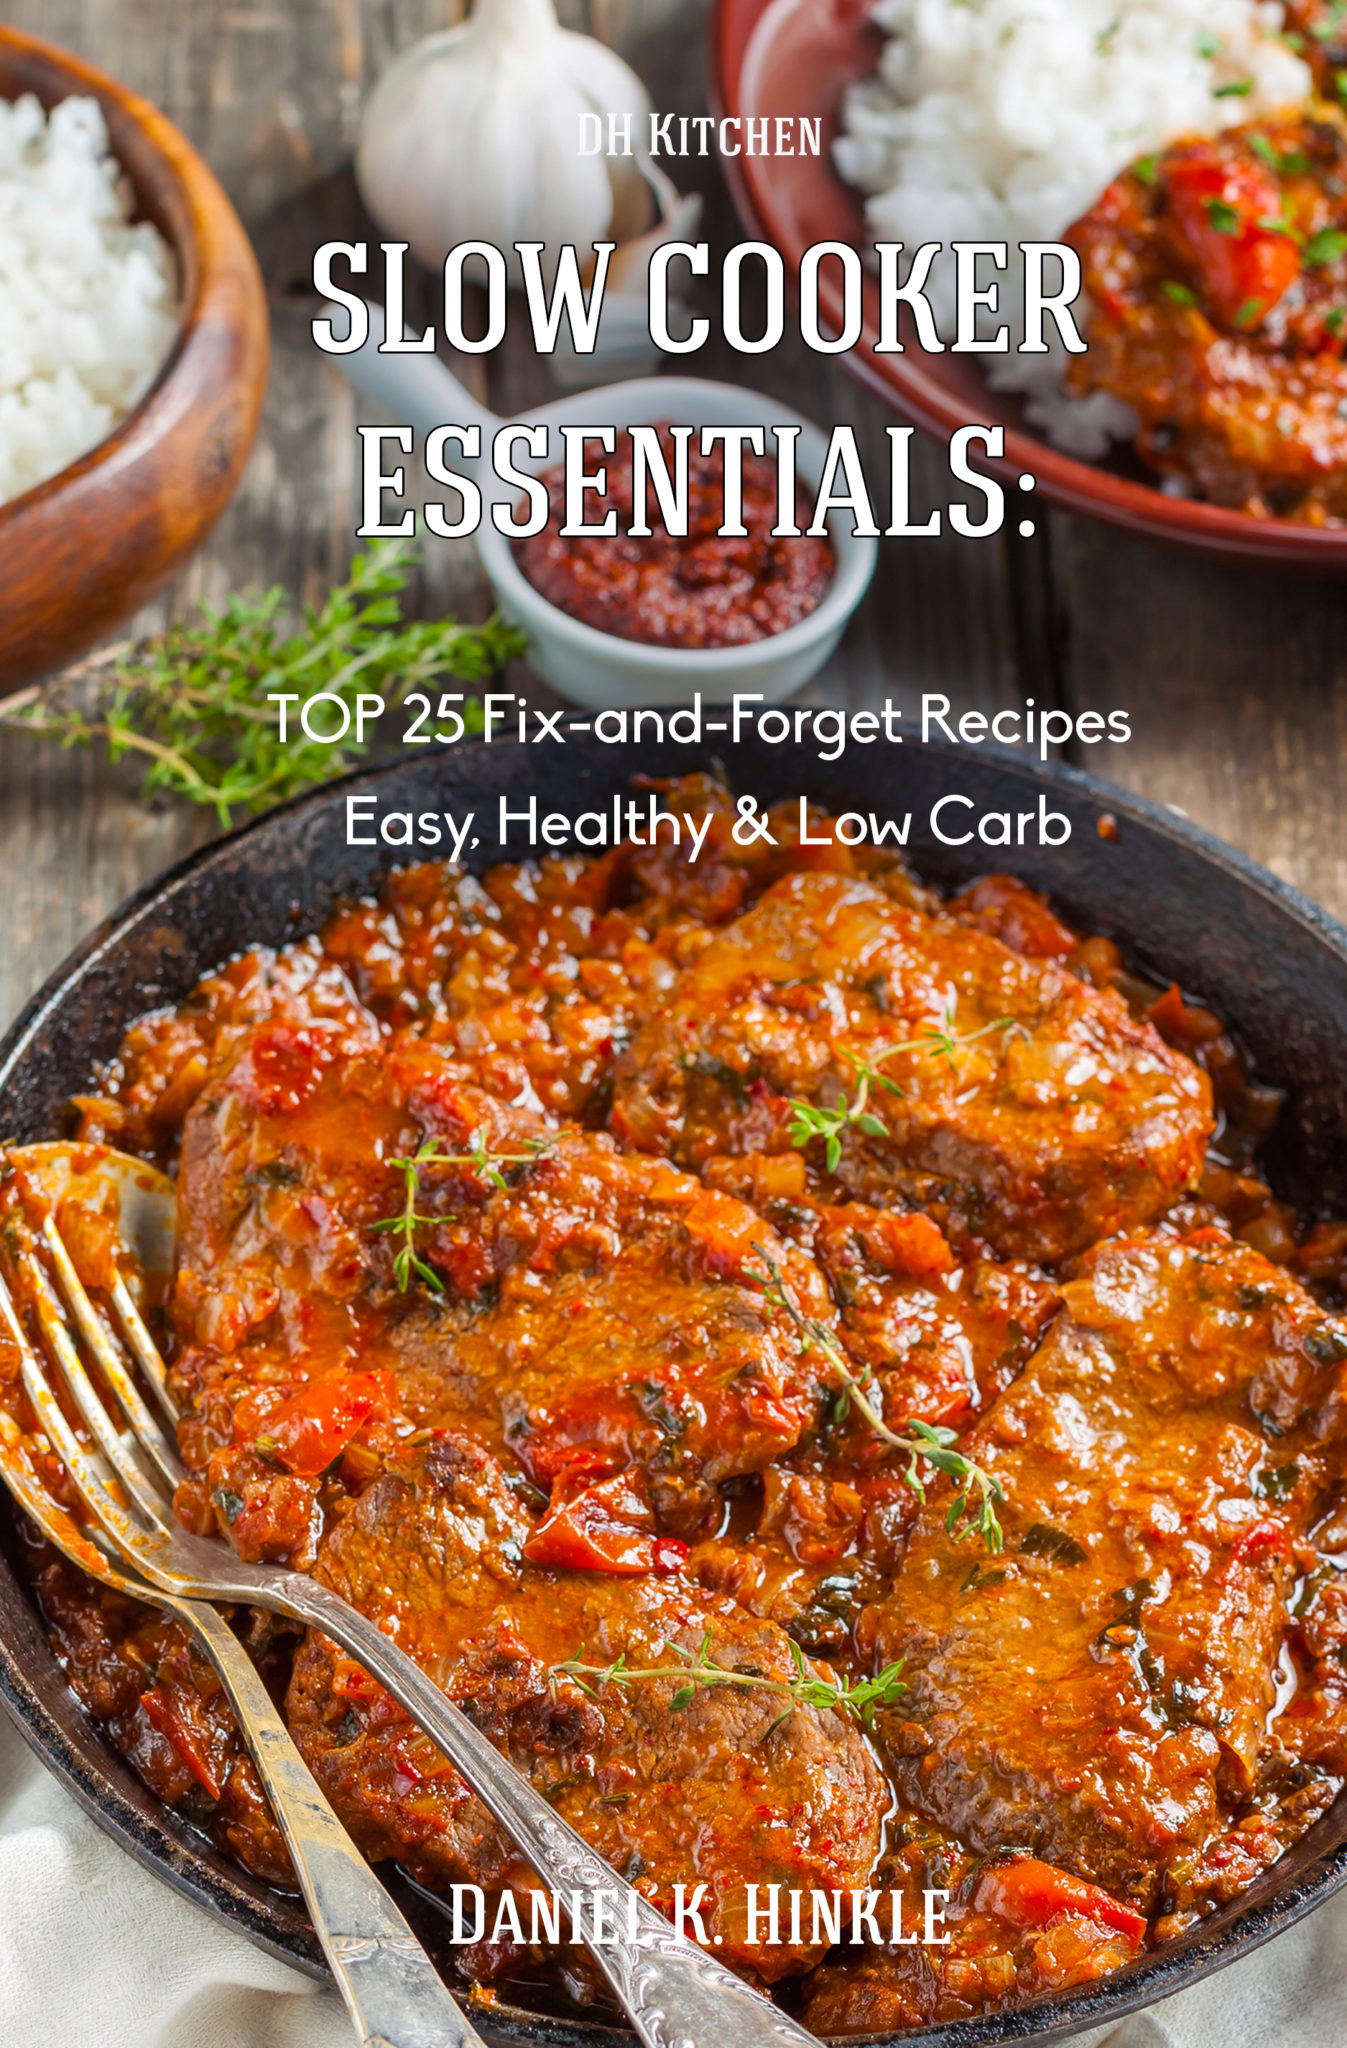 FREE: Slow Cooker Essentials: TOP 25 Fix-and-Forget Recipes: (Easy, Low Carb, Healthy) now With Chiken and Soups! (DH Kitchen Book 14) by Daniel Hinkle